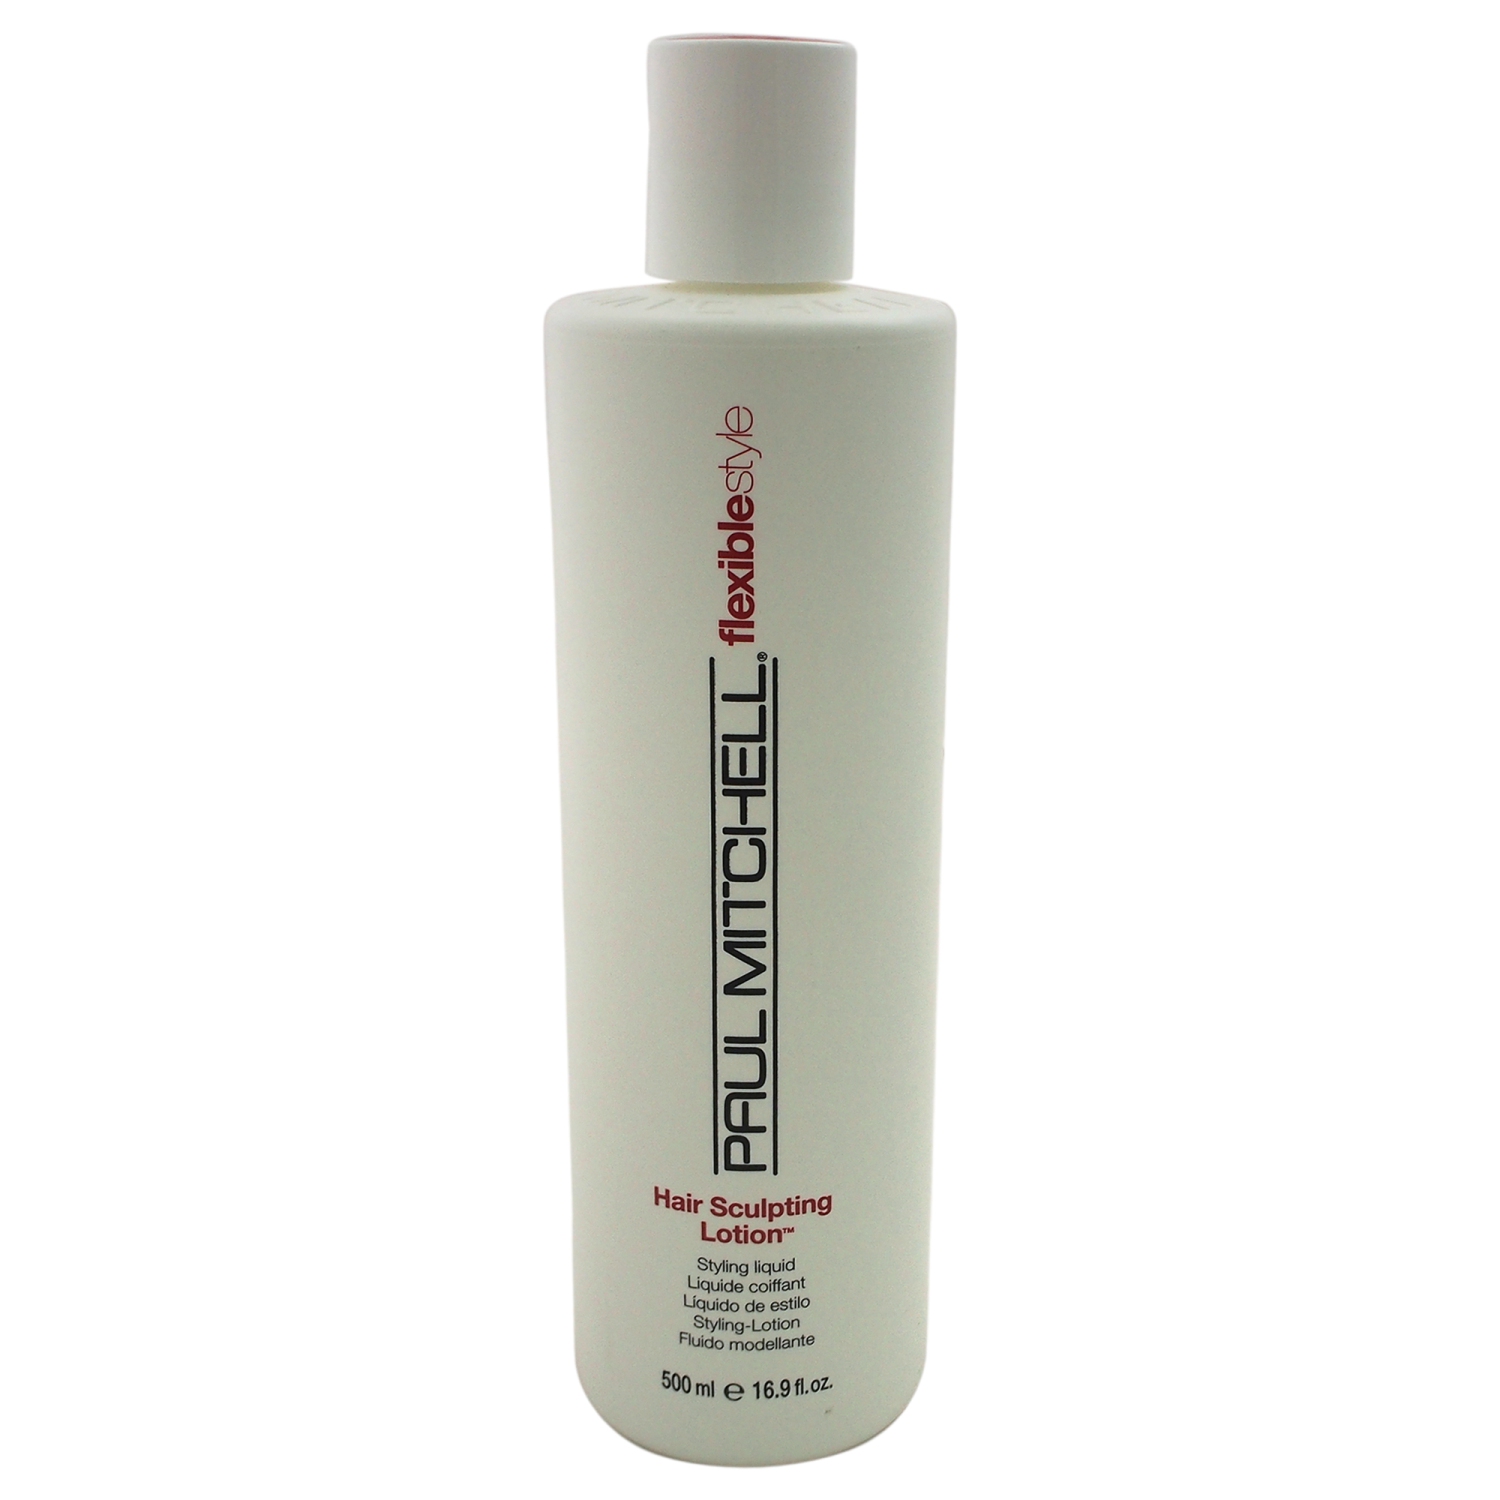 Paul Mitchell Flexible Style Hair Sculpting Lotion, 500mL | Best Buy Canada